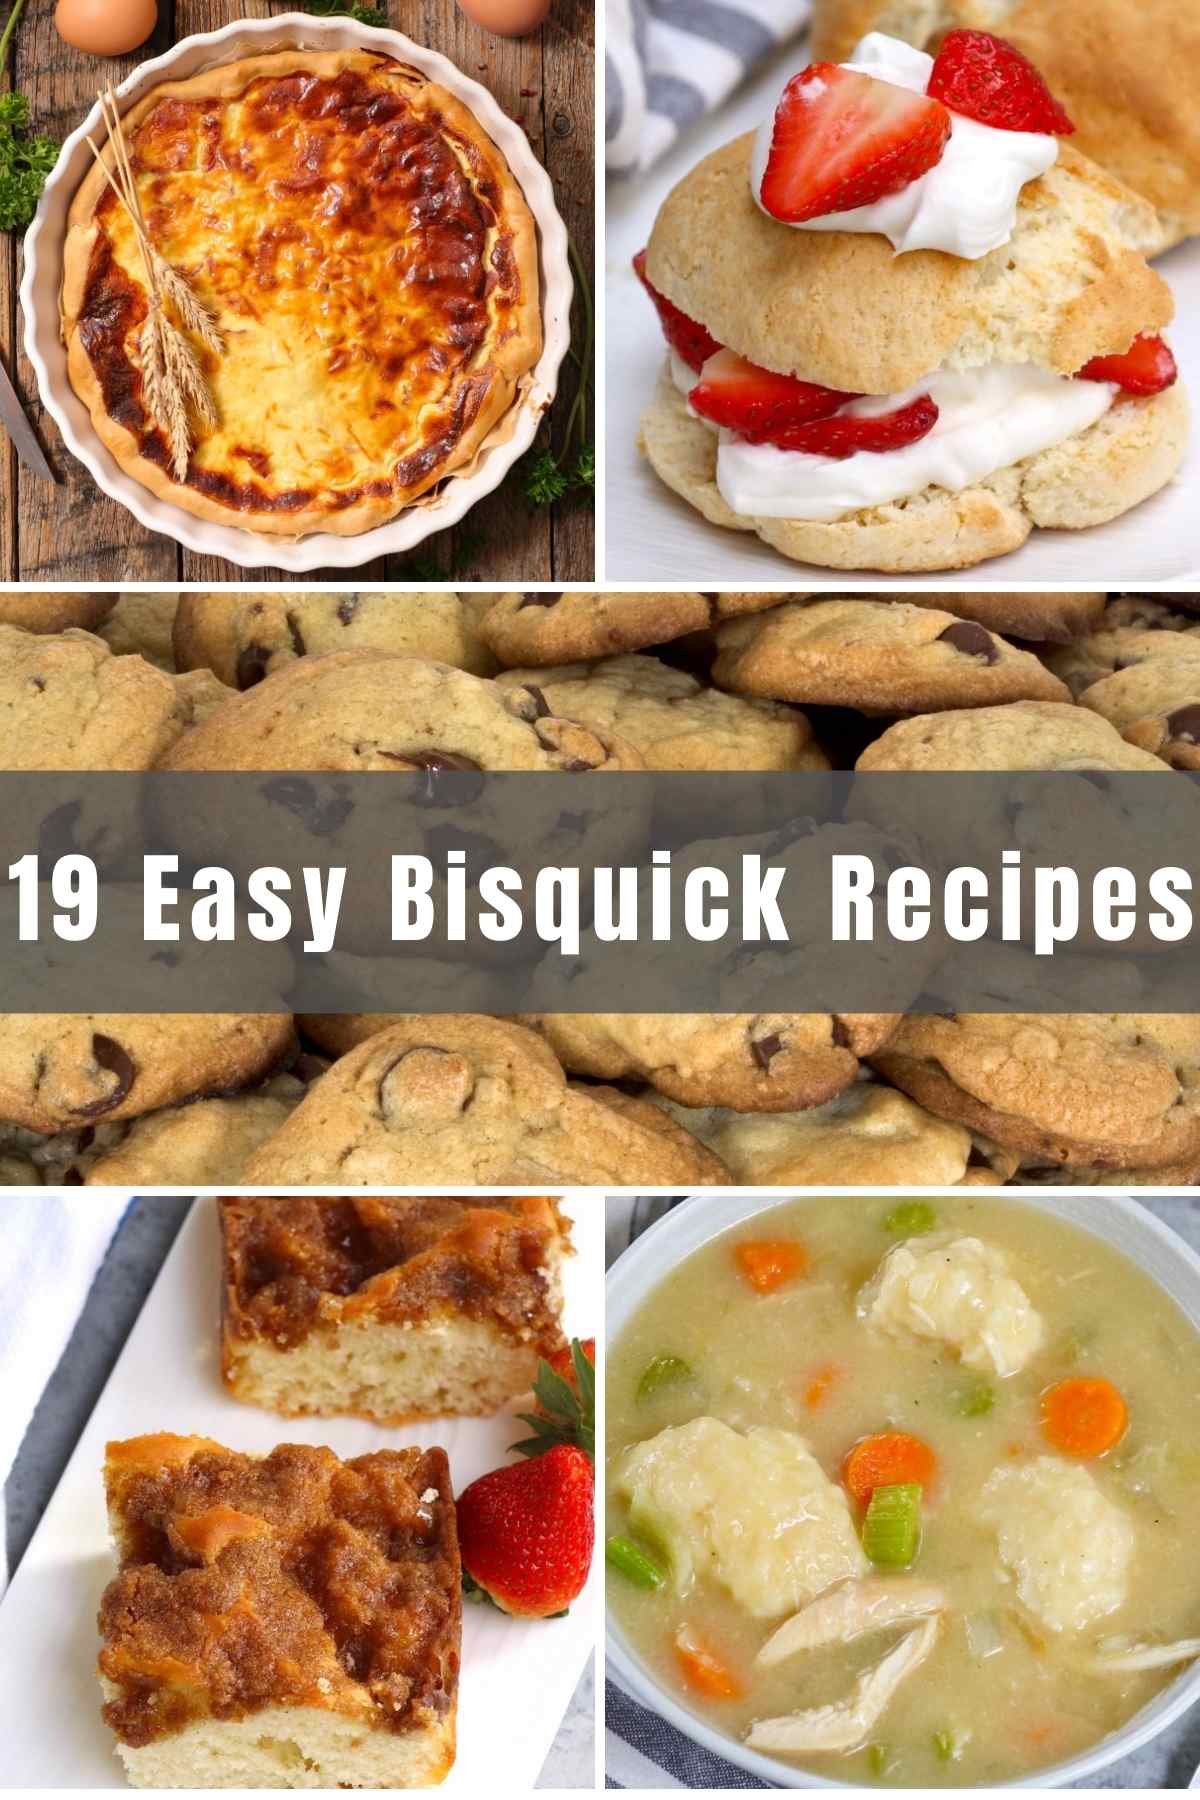 The best thing about Bisquick is that it makes baking easier without sacrificing any of the flavor! In this article, we’ve included 19 Quick and Easy Bisquick Recipes that will make your life easier and satisfy your cravings. Whether it’s sweet or savoury, Bisquick can do it all!